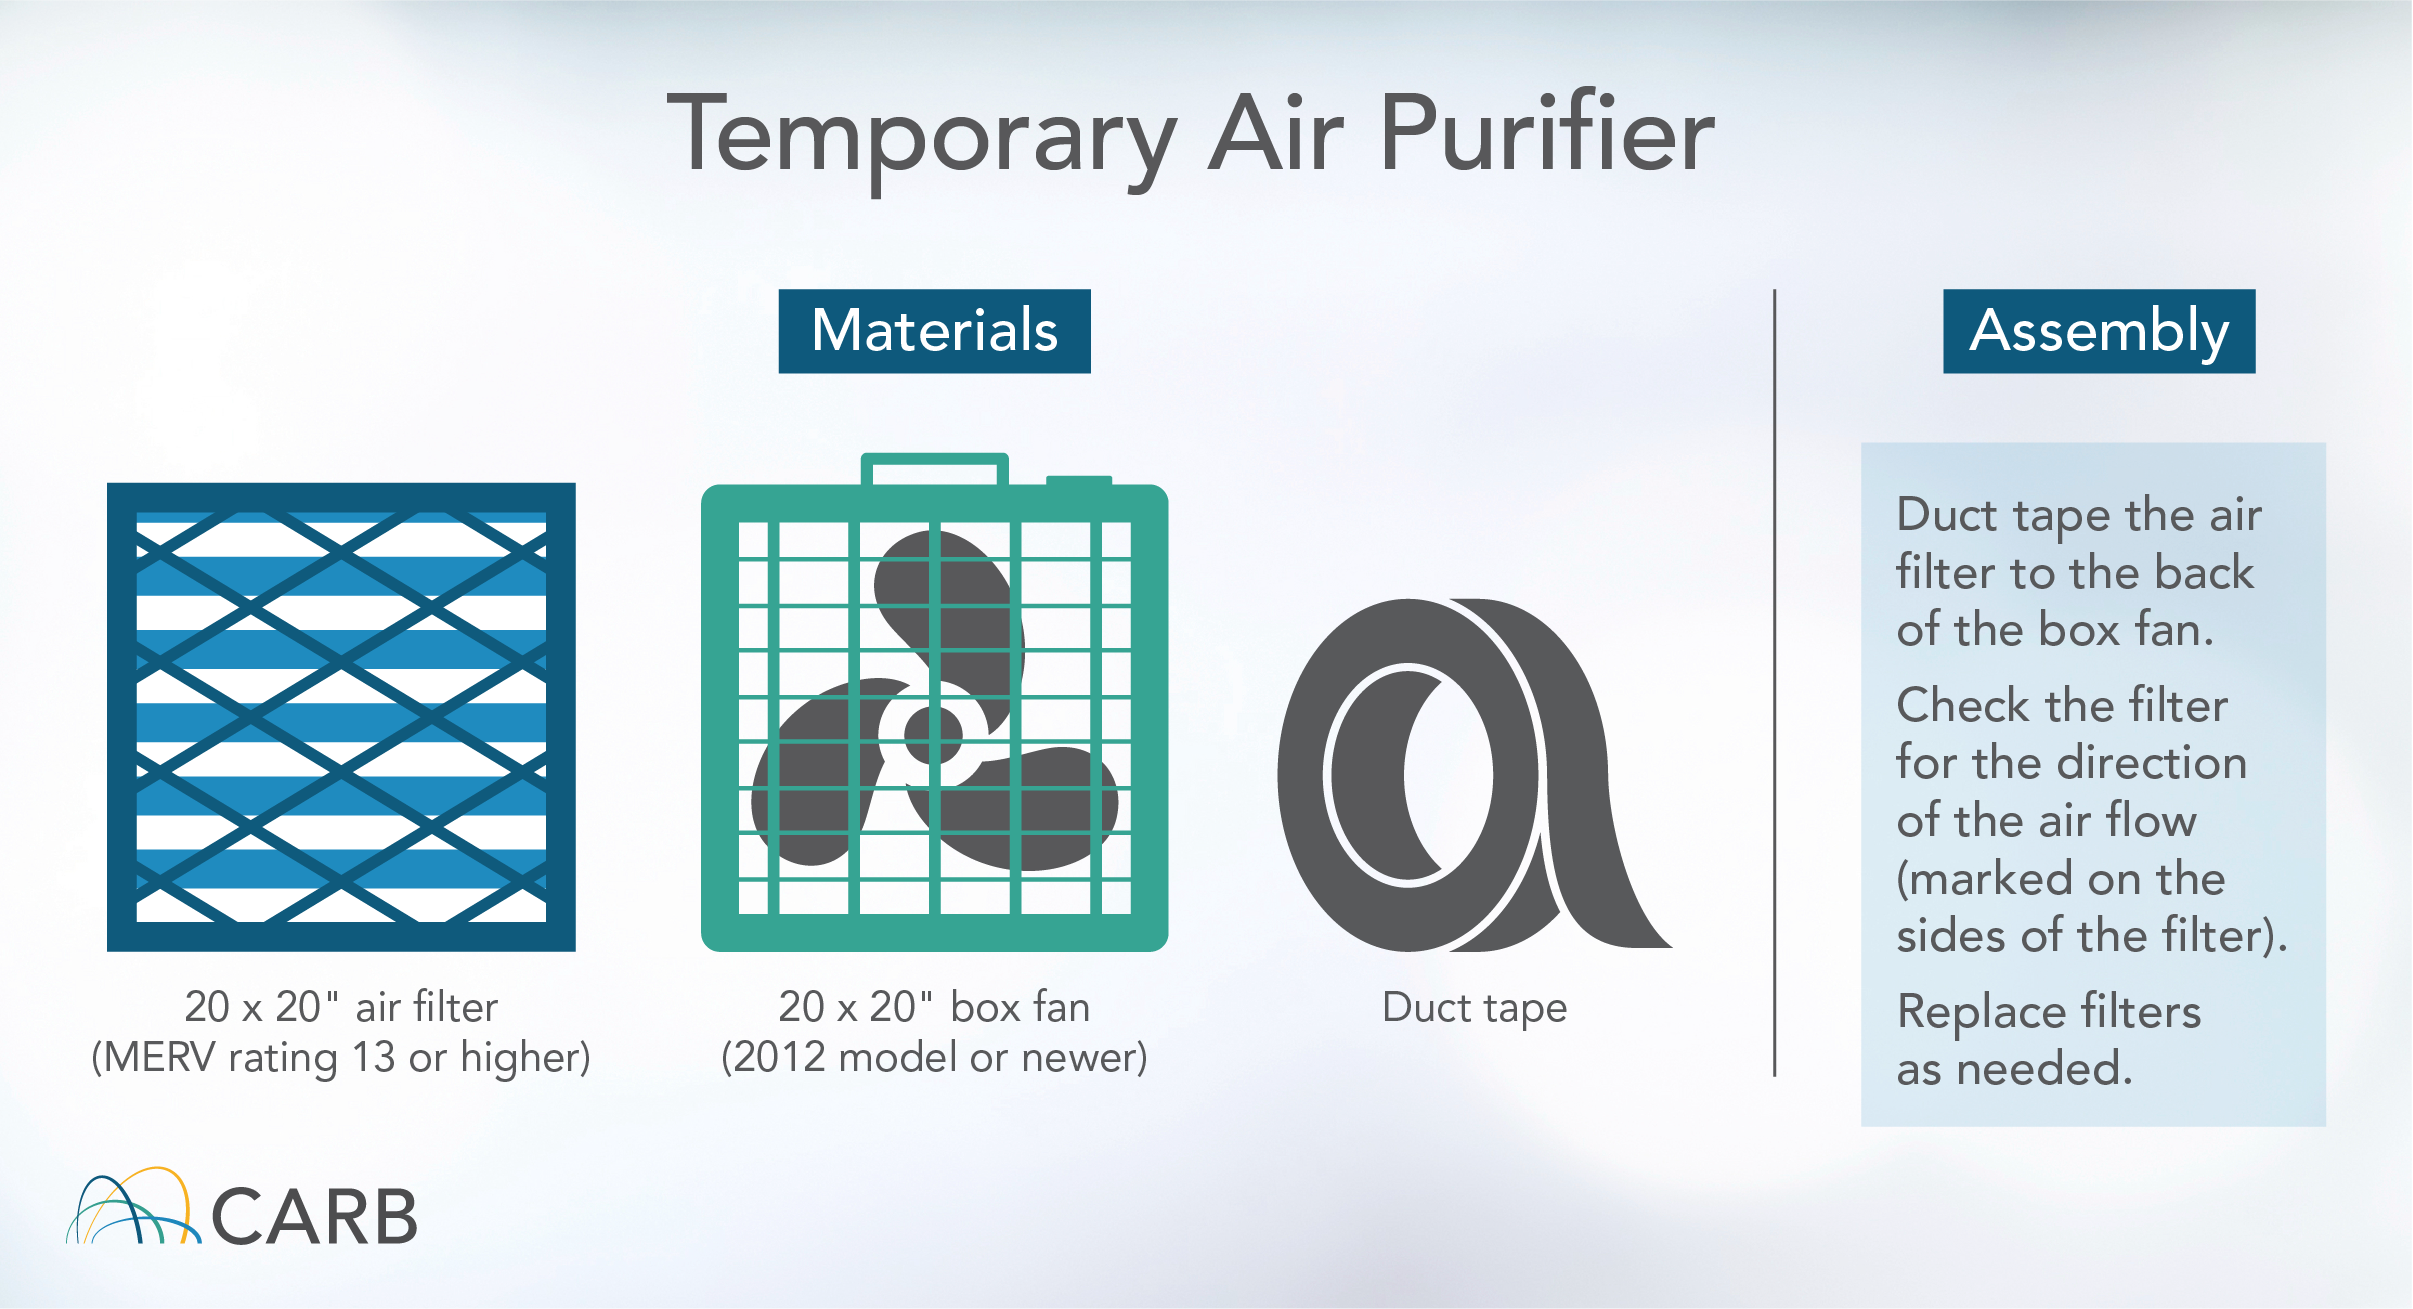 Temporary Air Purifier Materials: 20 x 20" air filter (MERV rating 13 or higher) 20 x 20" box fan (2012 model or newer) Duct tape Assembly: Duct tape the air filter to the back of the box fan. Check the filter for the direction of the air flow (marked on the sides of the filter). Replace filters as needed.